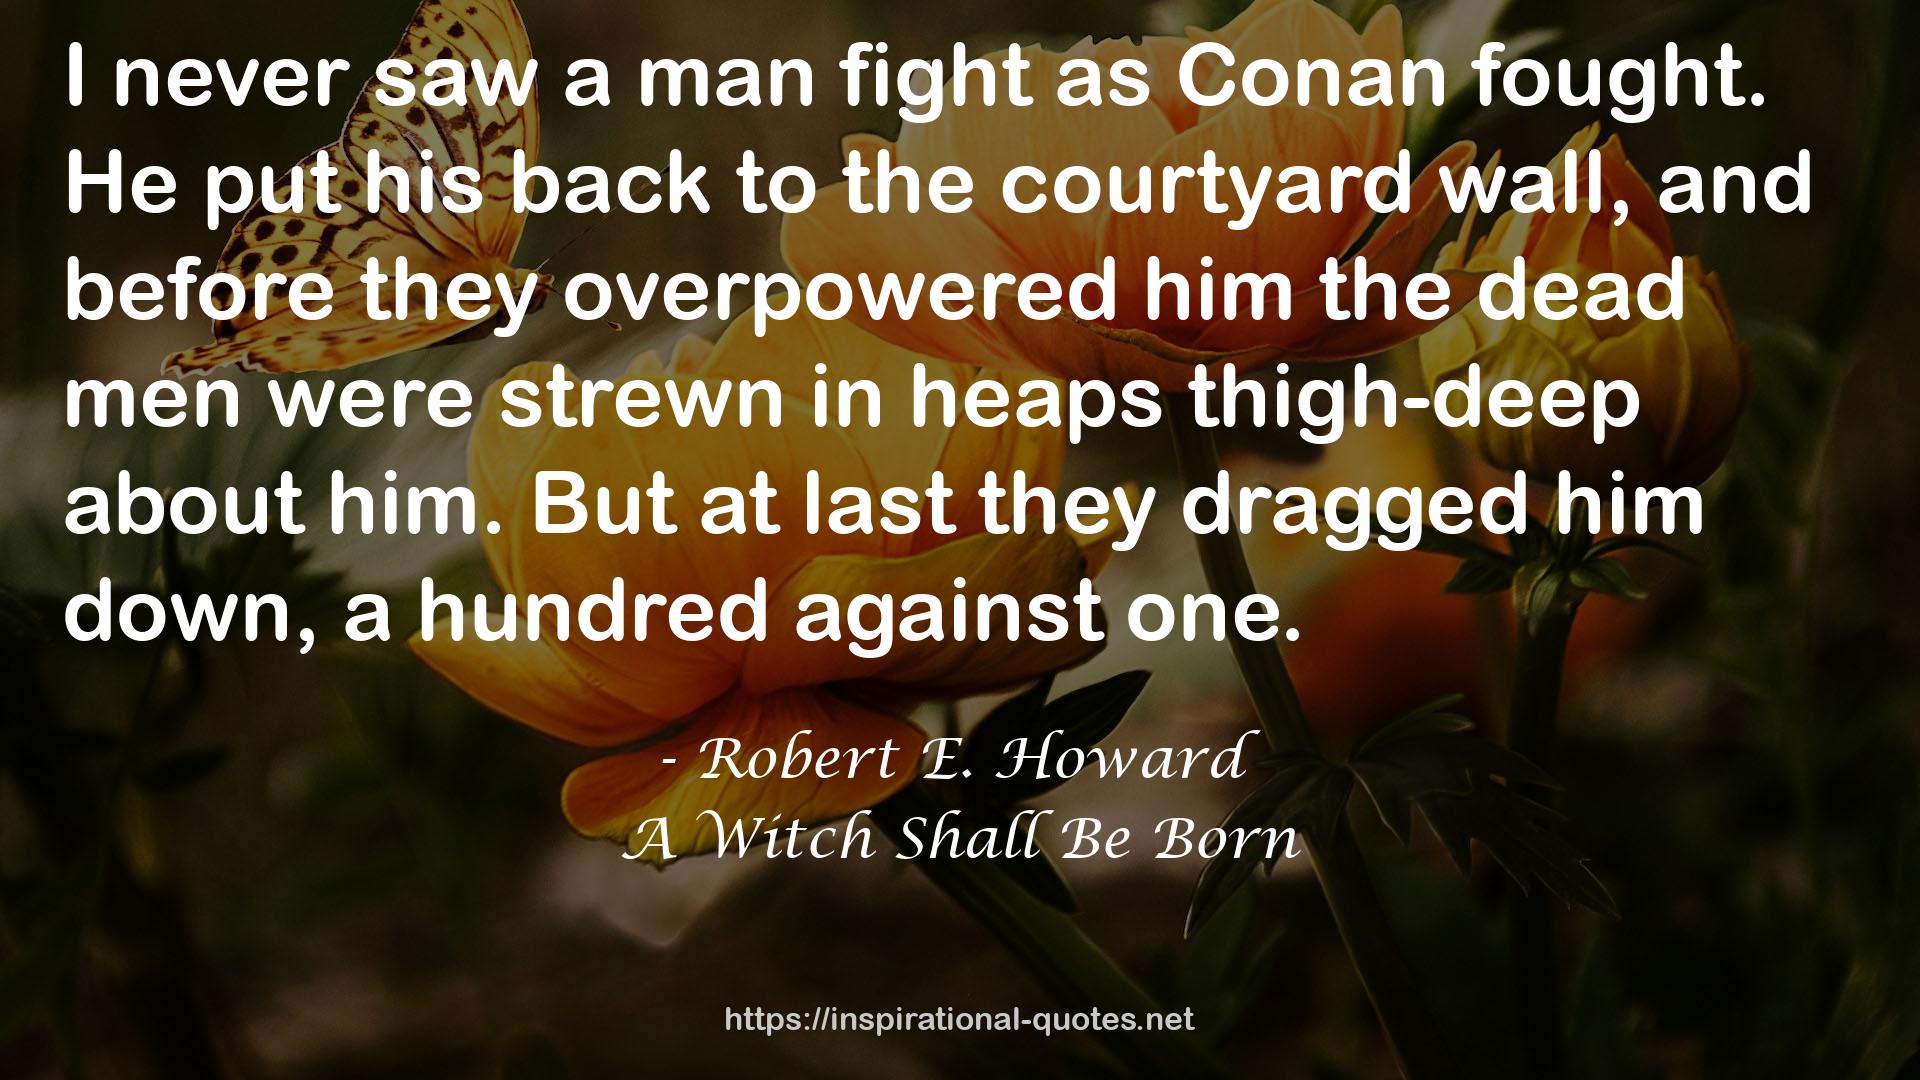 A Witch Shall Be Born QUOTES